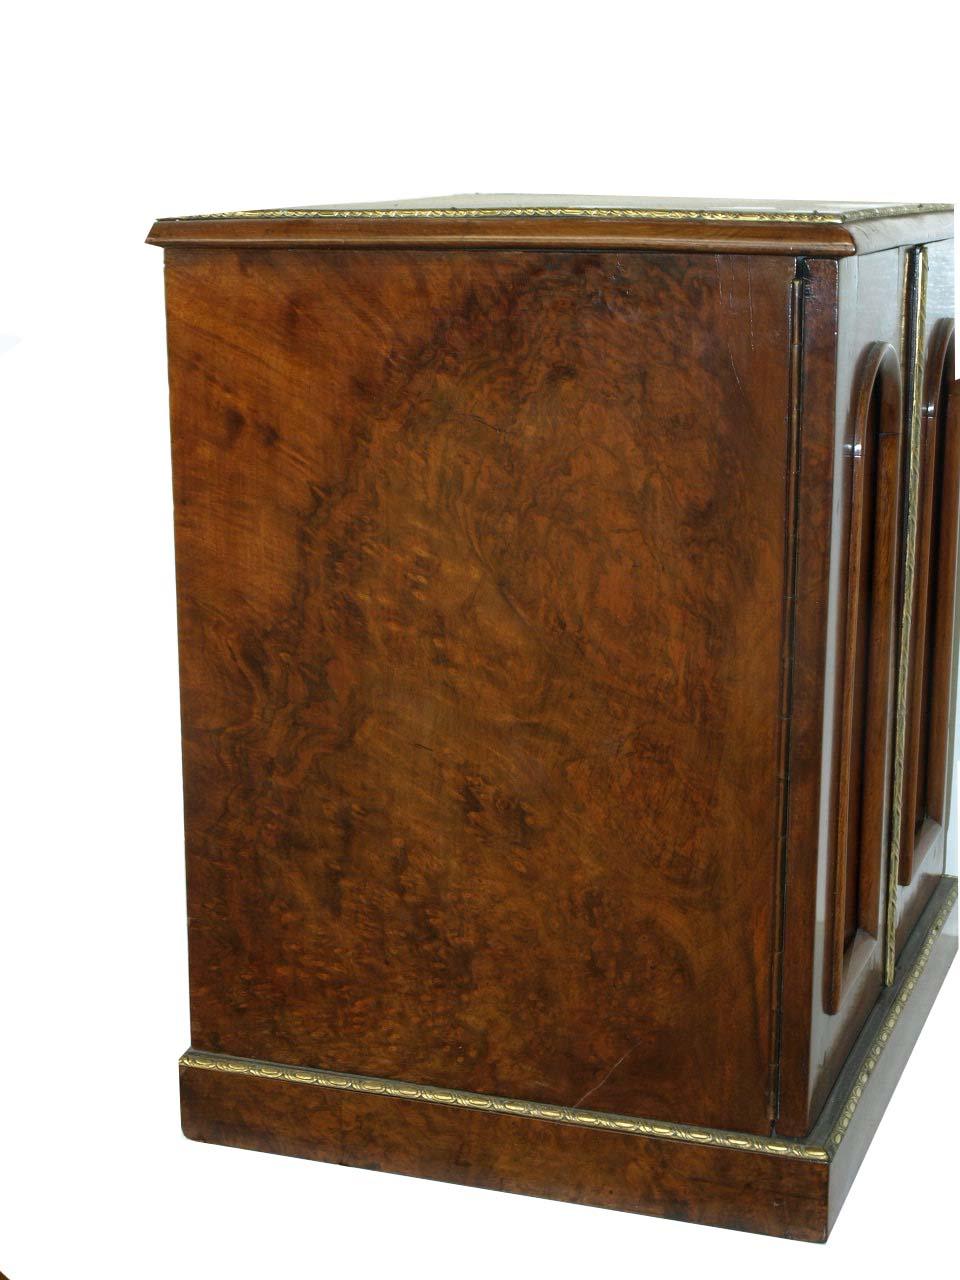 English burl walnut cabinet, the double doors(with locking key) with inset panels, the entire cabinet is veneered with beautiful burl walnut in very good condition, the interior and back side of the doors are lined in dark blue fabric. The upper and